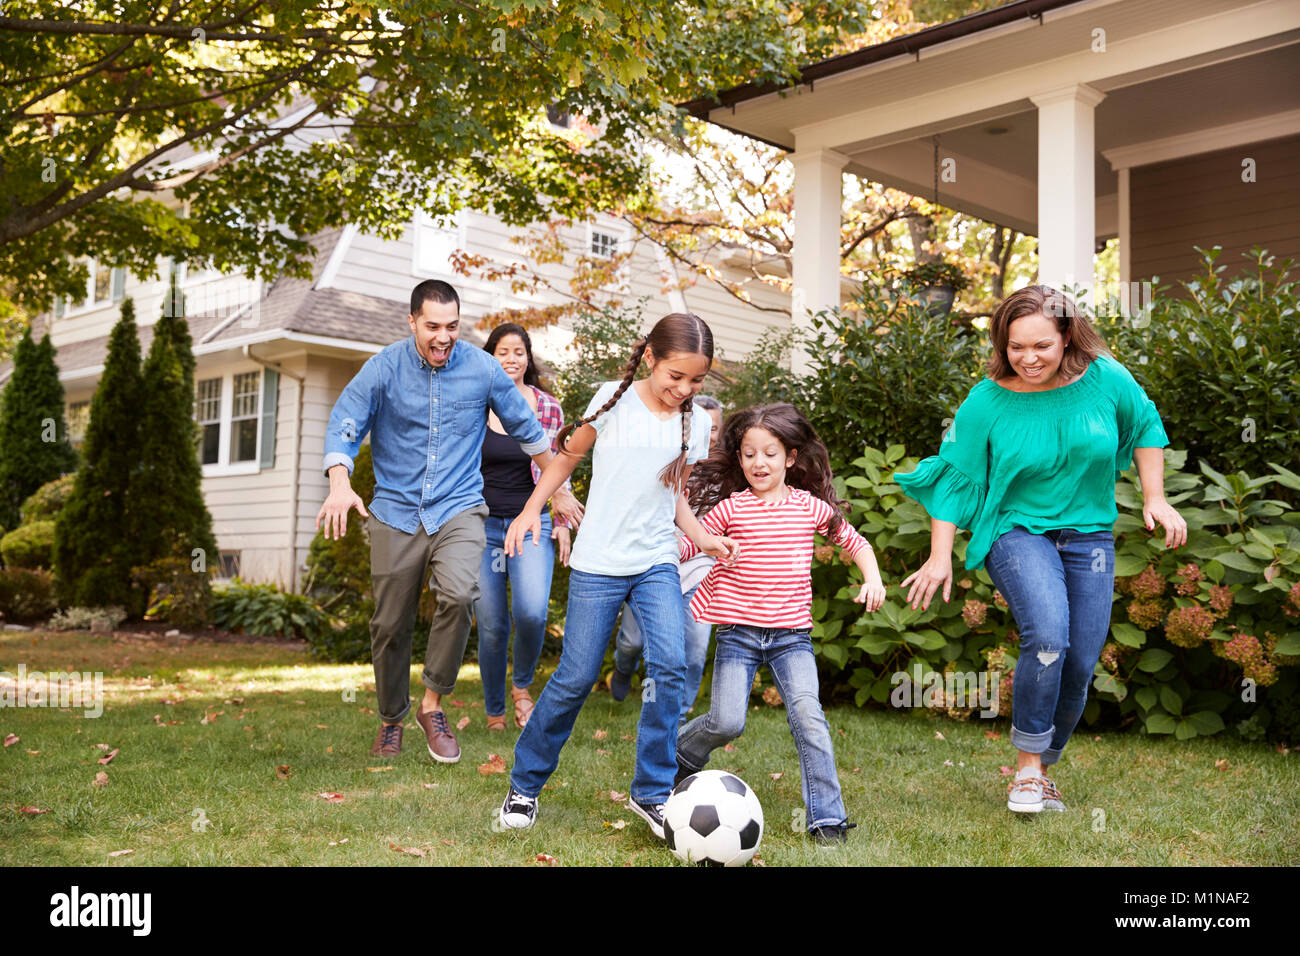 Multi Generation Family Playing Soccer In Garden Stock Photo